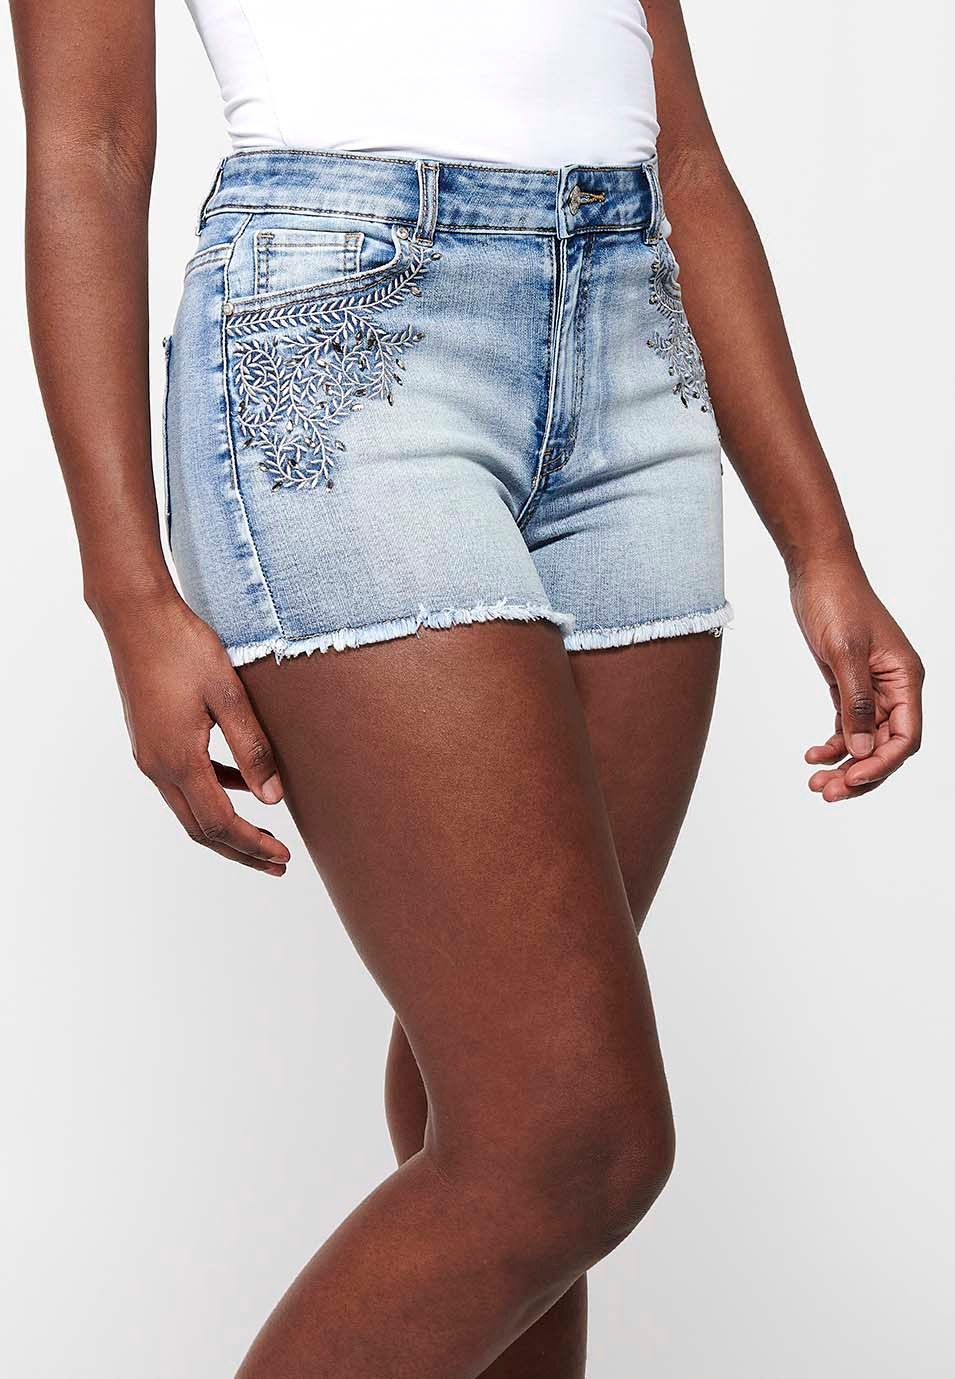 Frayed finish shorts with floral embroidery, light blue color for women